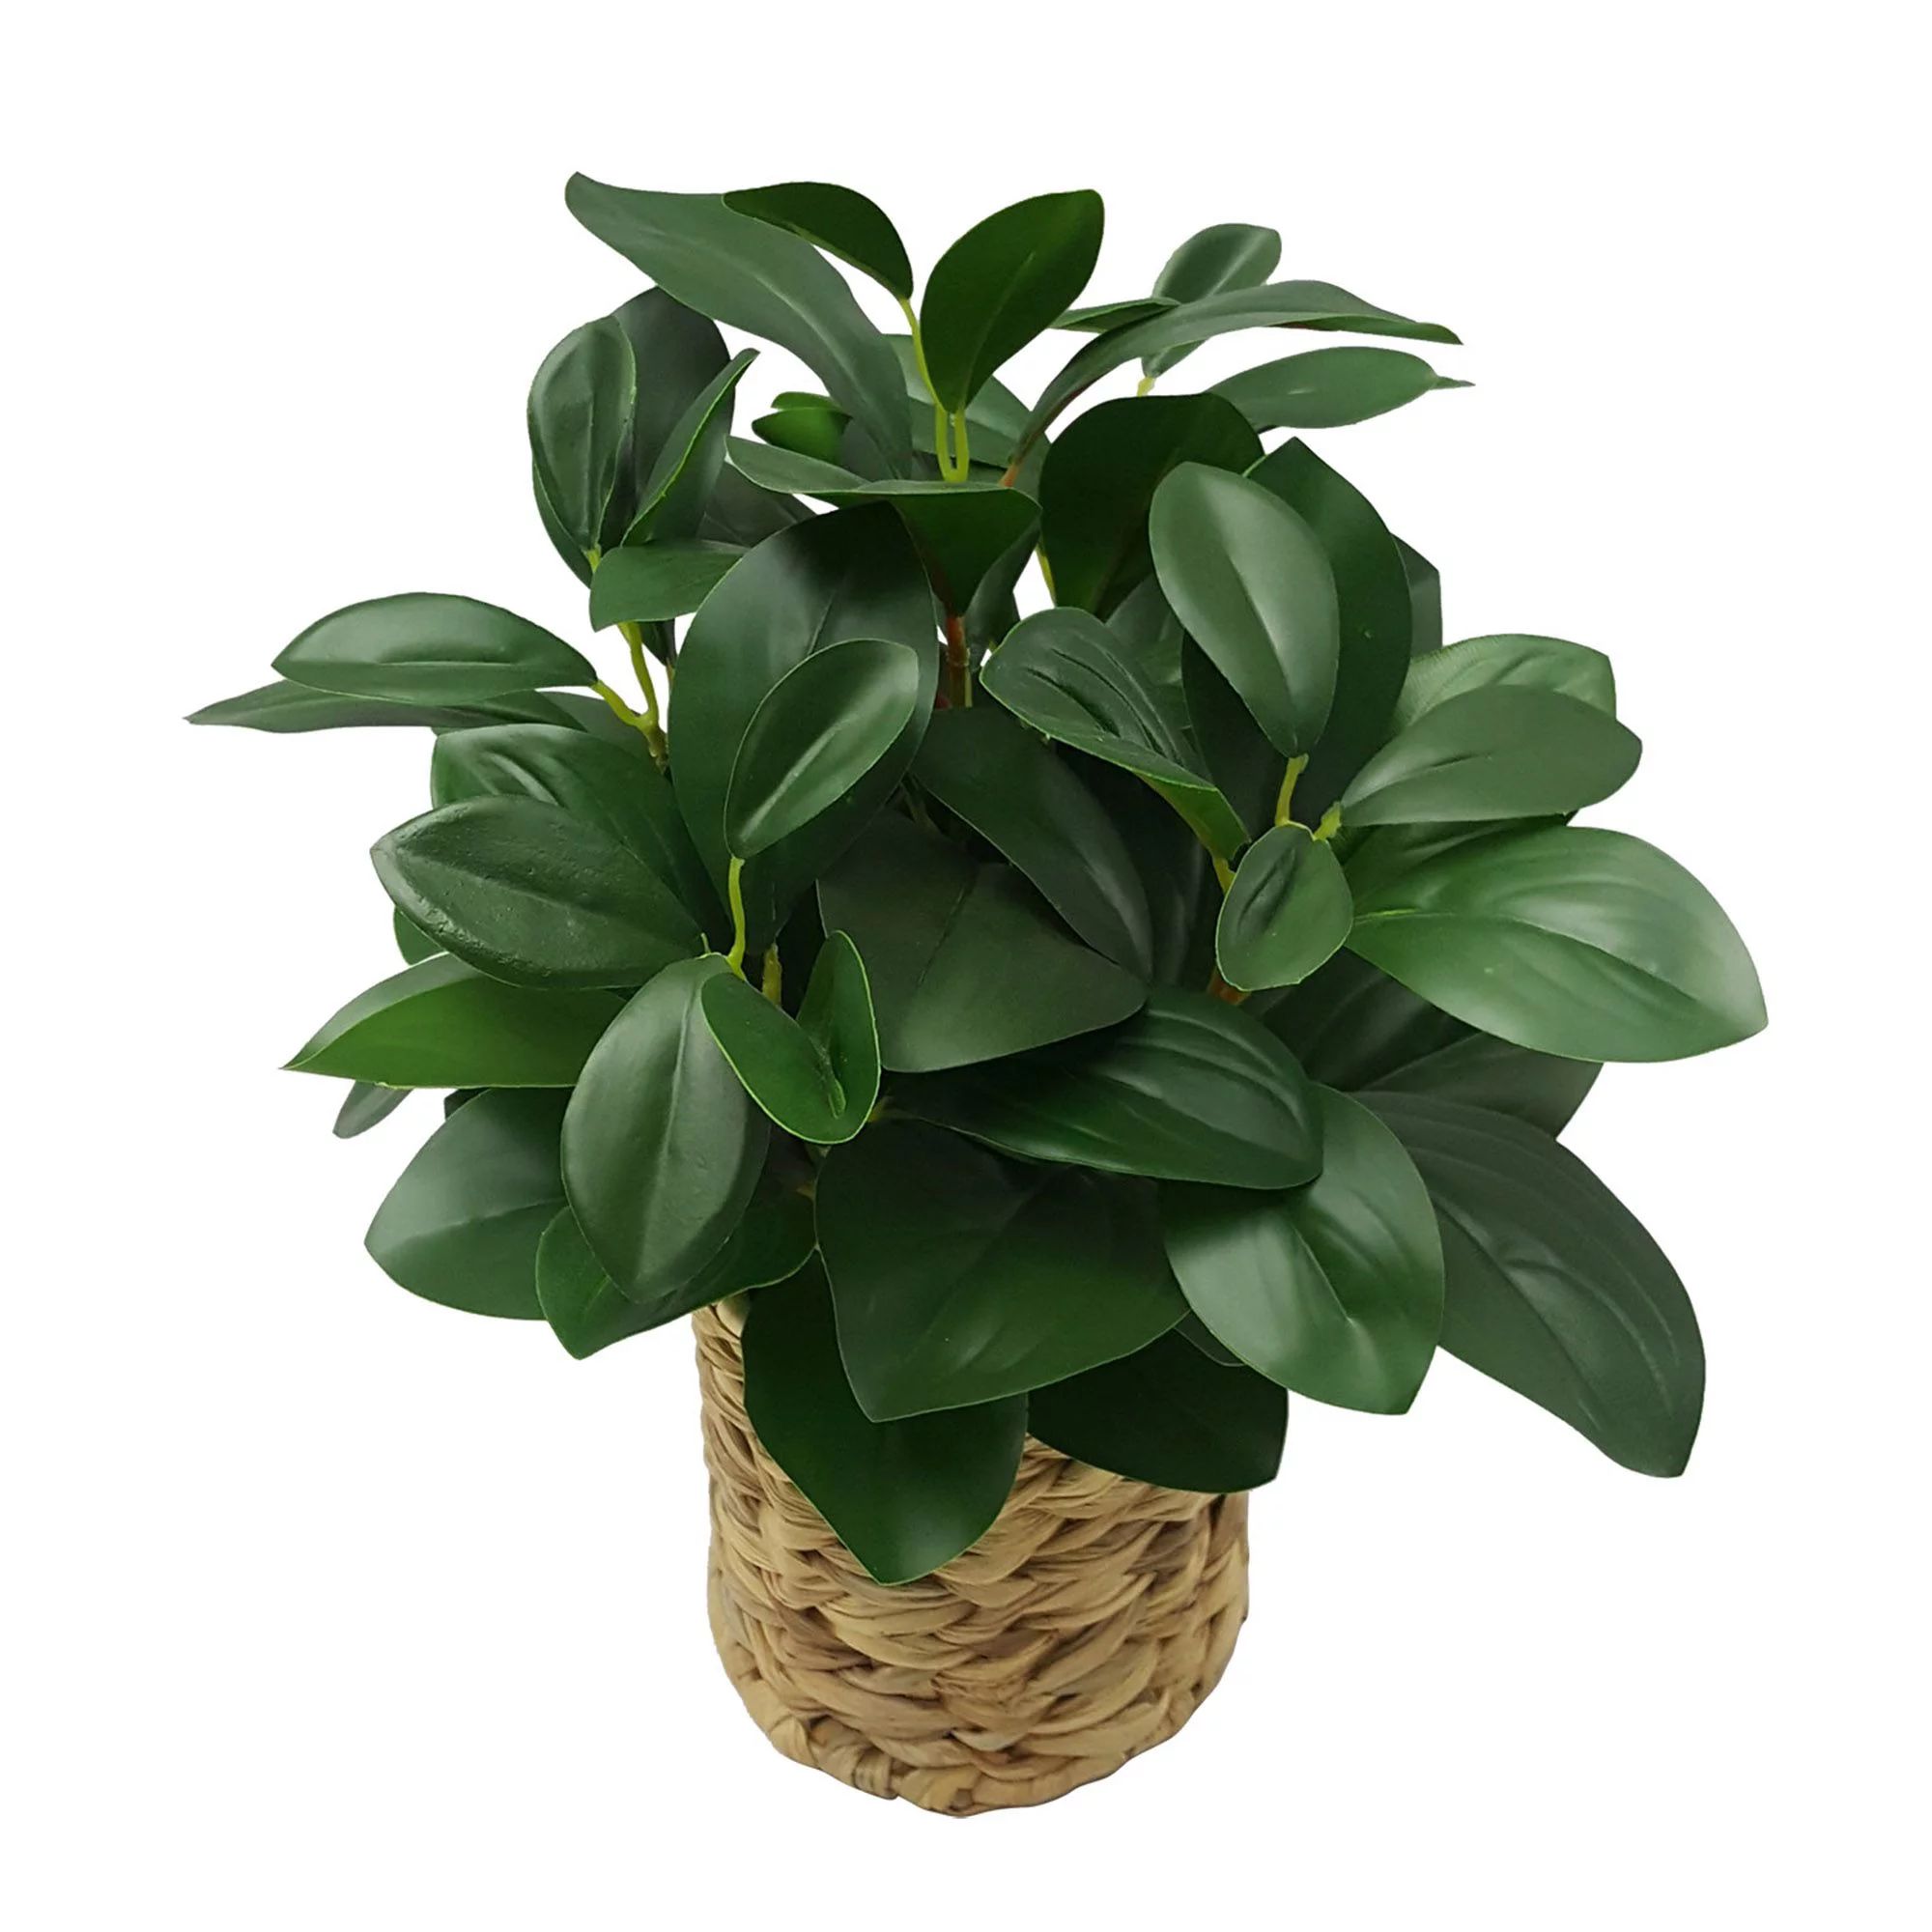 Better Homes & Gardens 13" Artificial Peperomia Plant in Wicker Basket, Tan, Green Peperomia | Walmart (US)